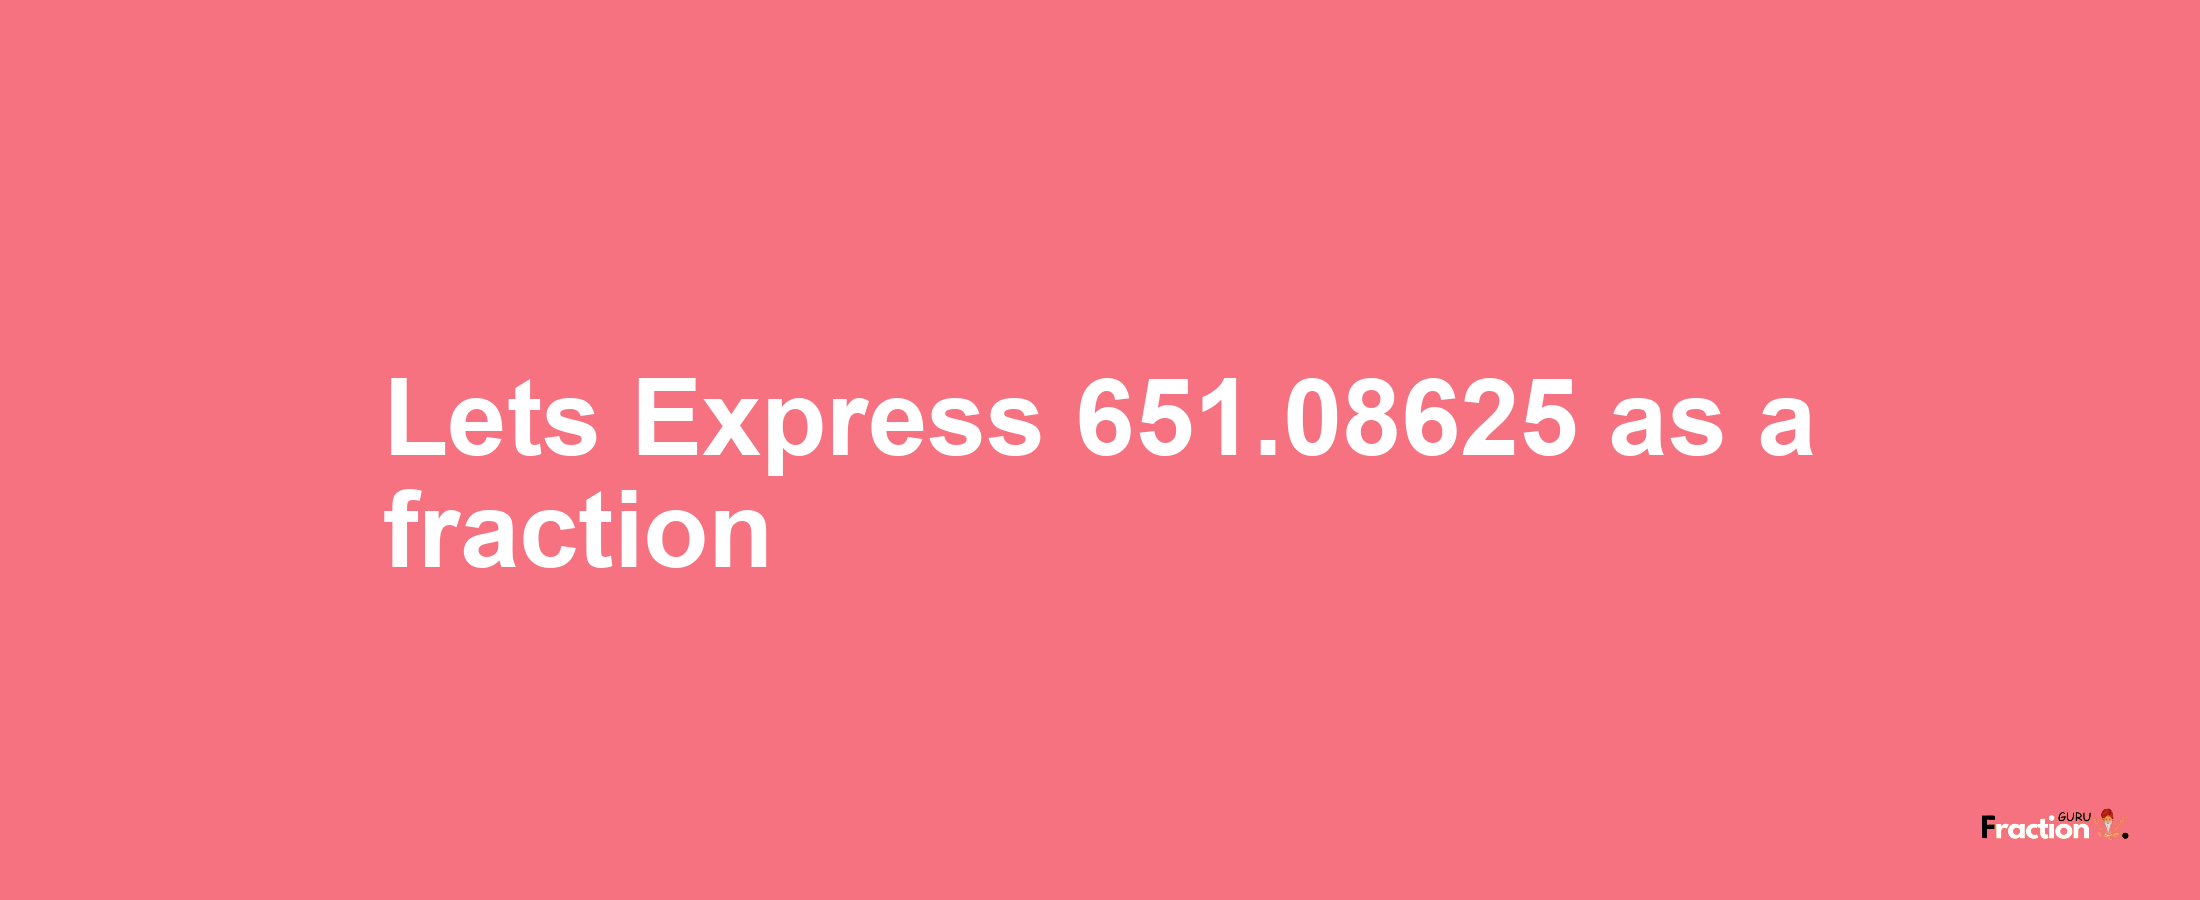 Lets Express 651.08625 as afraction